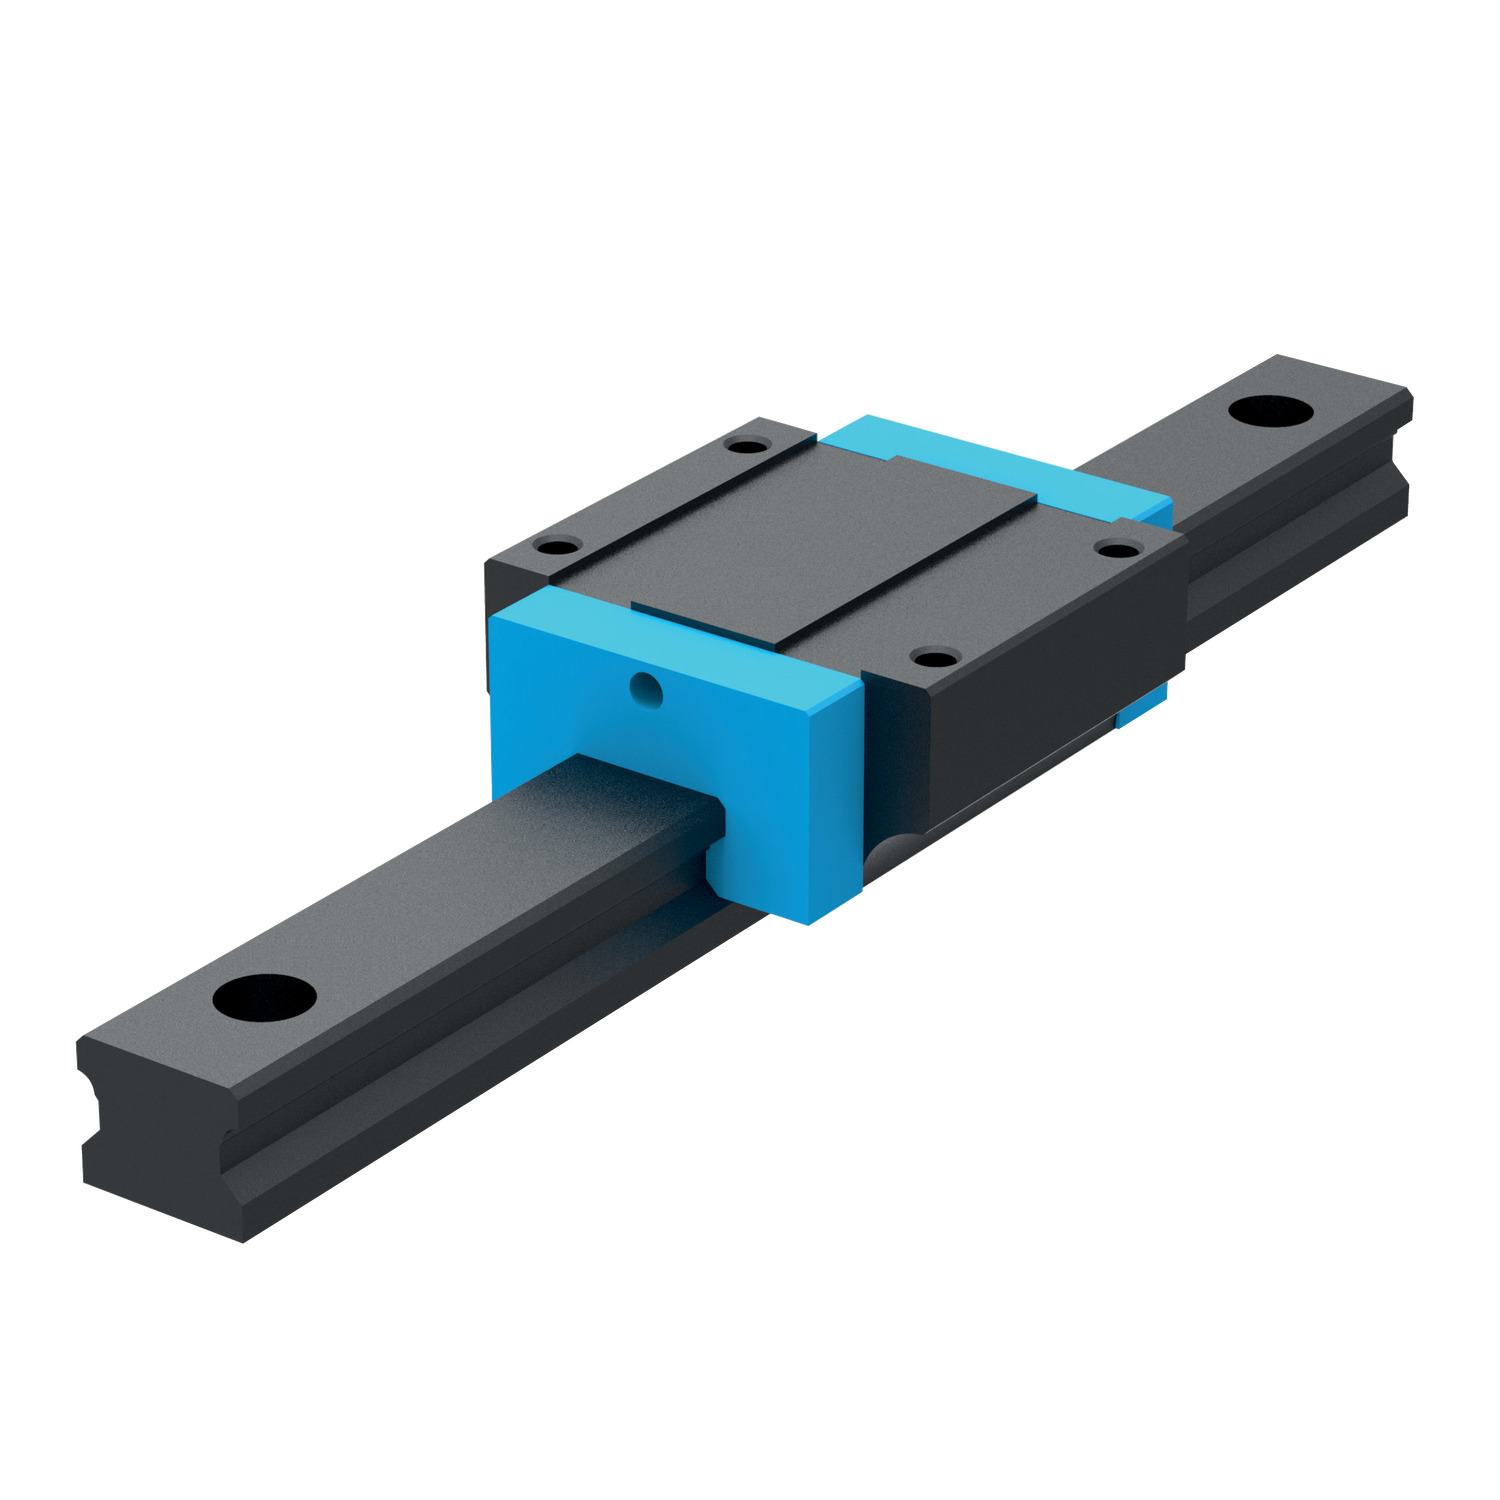 Linear Guideways Blackened front-fixing Linear Guide, comes in 15mm, 20mm & 25mm lengths. Rear-fixing versions (L1016.BR) and matching blackened carriages (L1016.F-BC and L1016.U-BC) are also available.